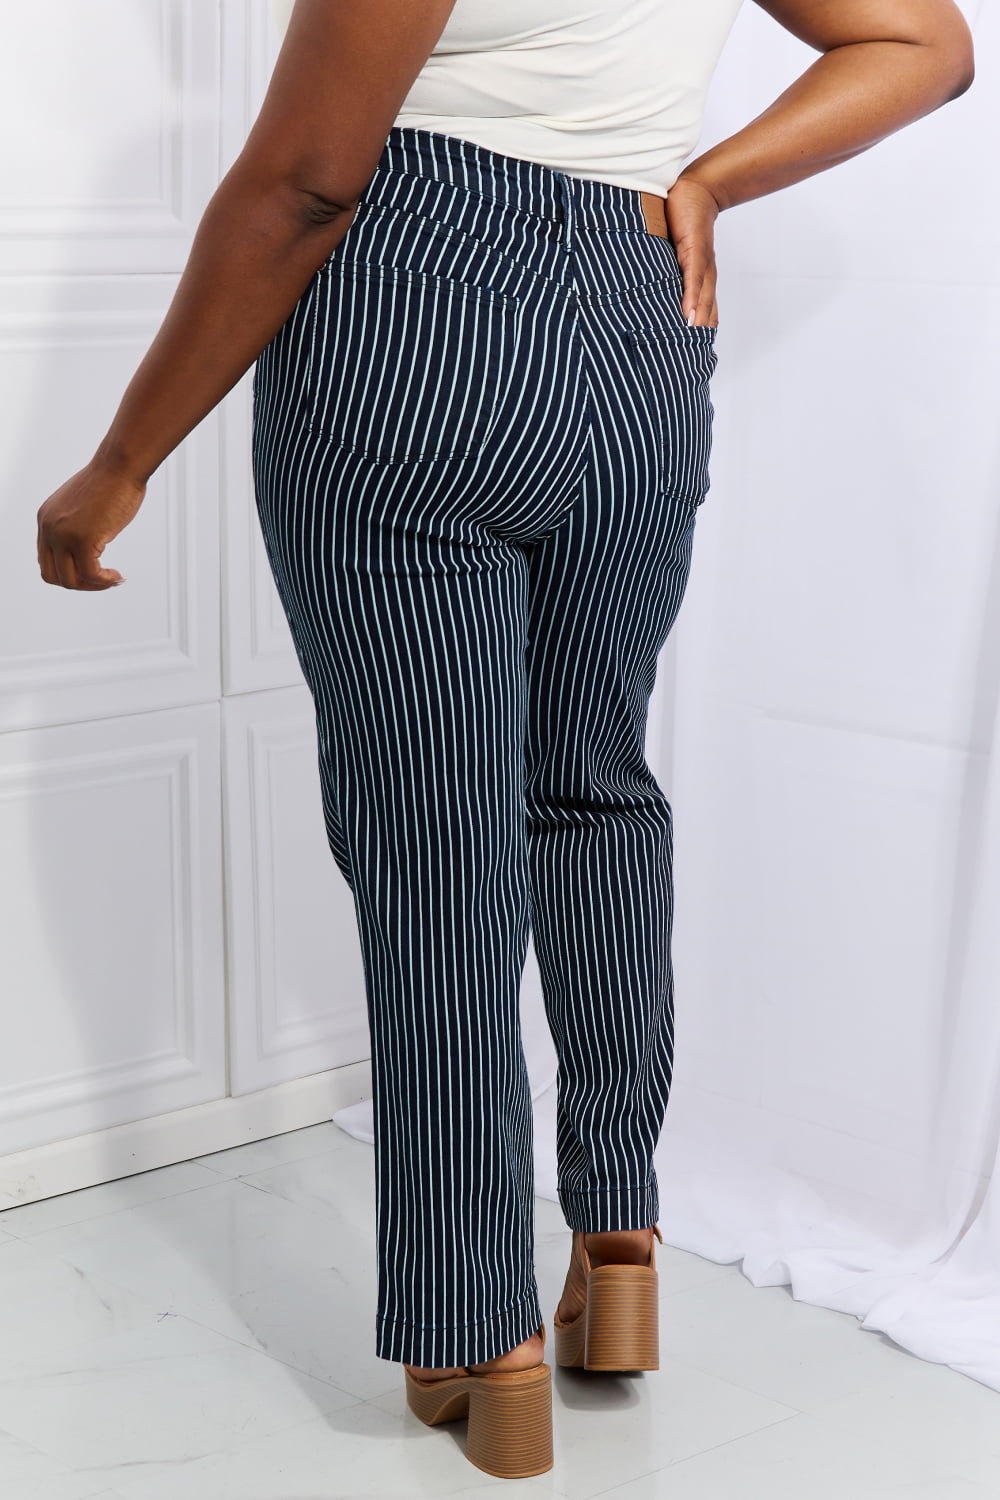 Judy Blue Cassidy Full Size High Waisted Tummy Control Striped Straight Jeans - Jeans - FITGGINS